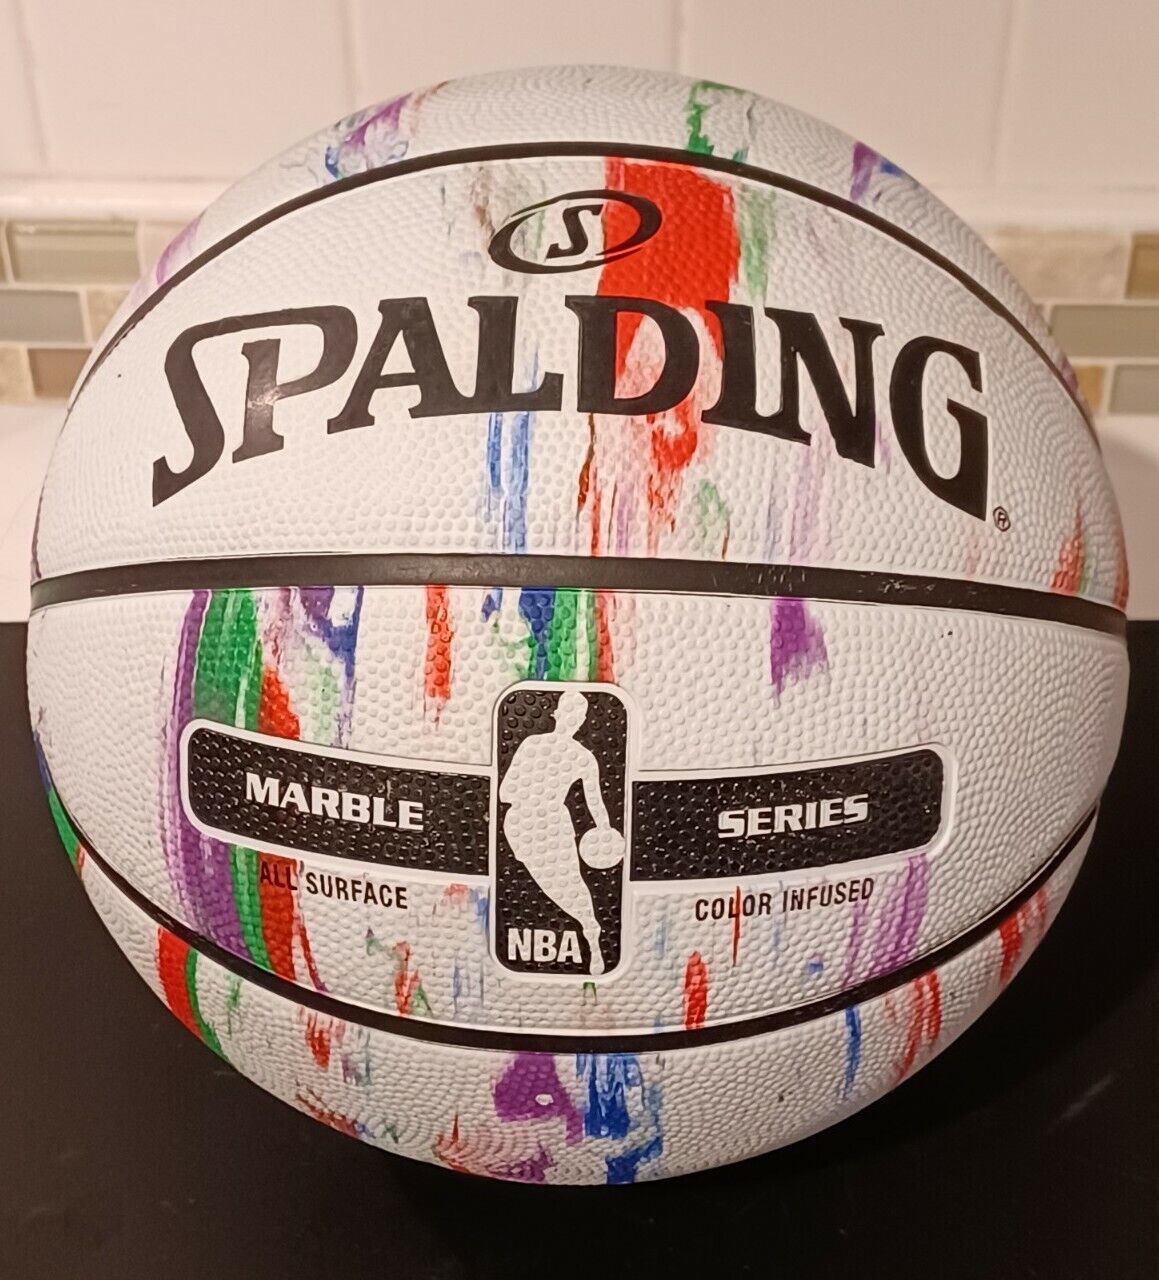 Max 42% OFF Spalding Marble Series Multi-Color Basketball Size shipfree 7 Outdoor